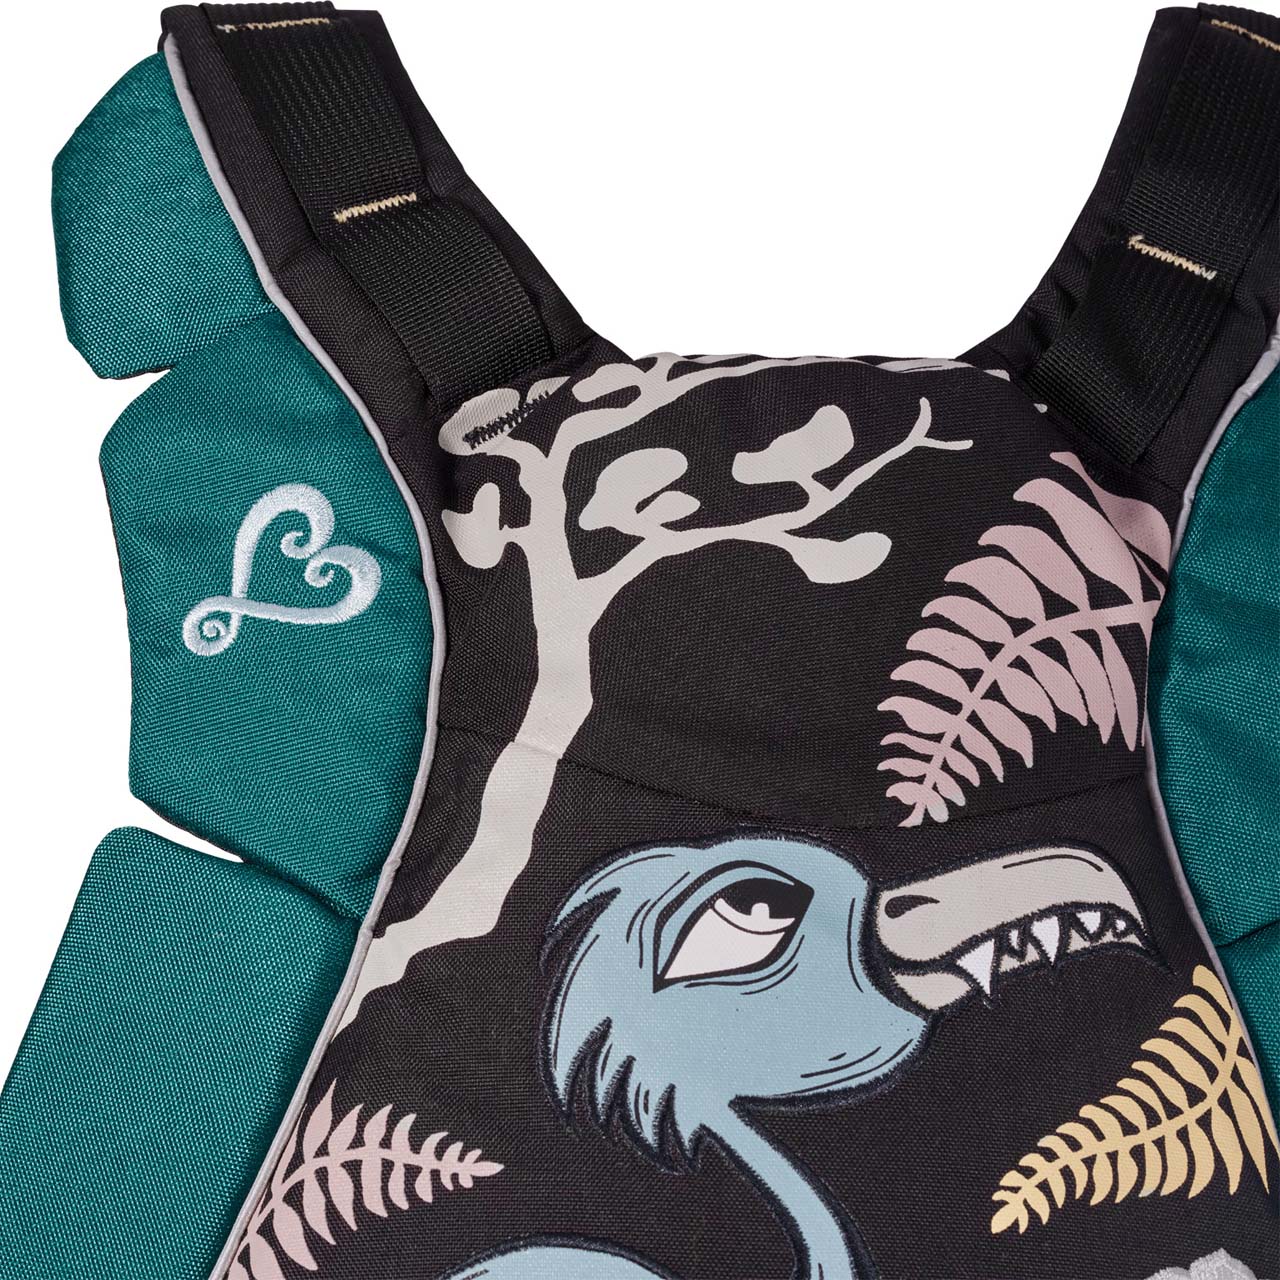 Astral Greenjacket LE Schwimmweste - Wild Things, L/XL